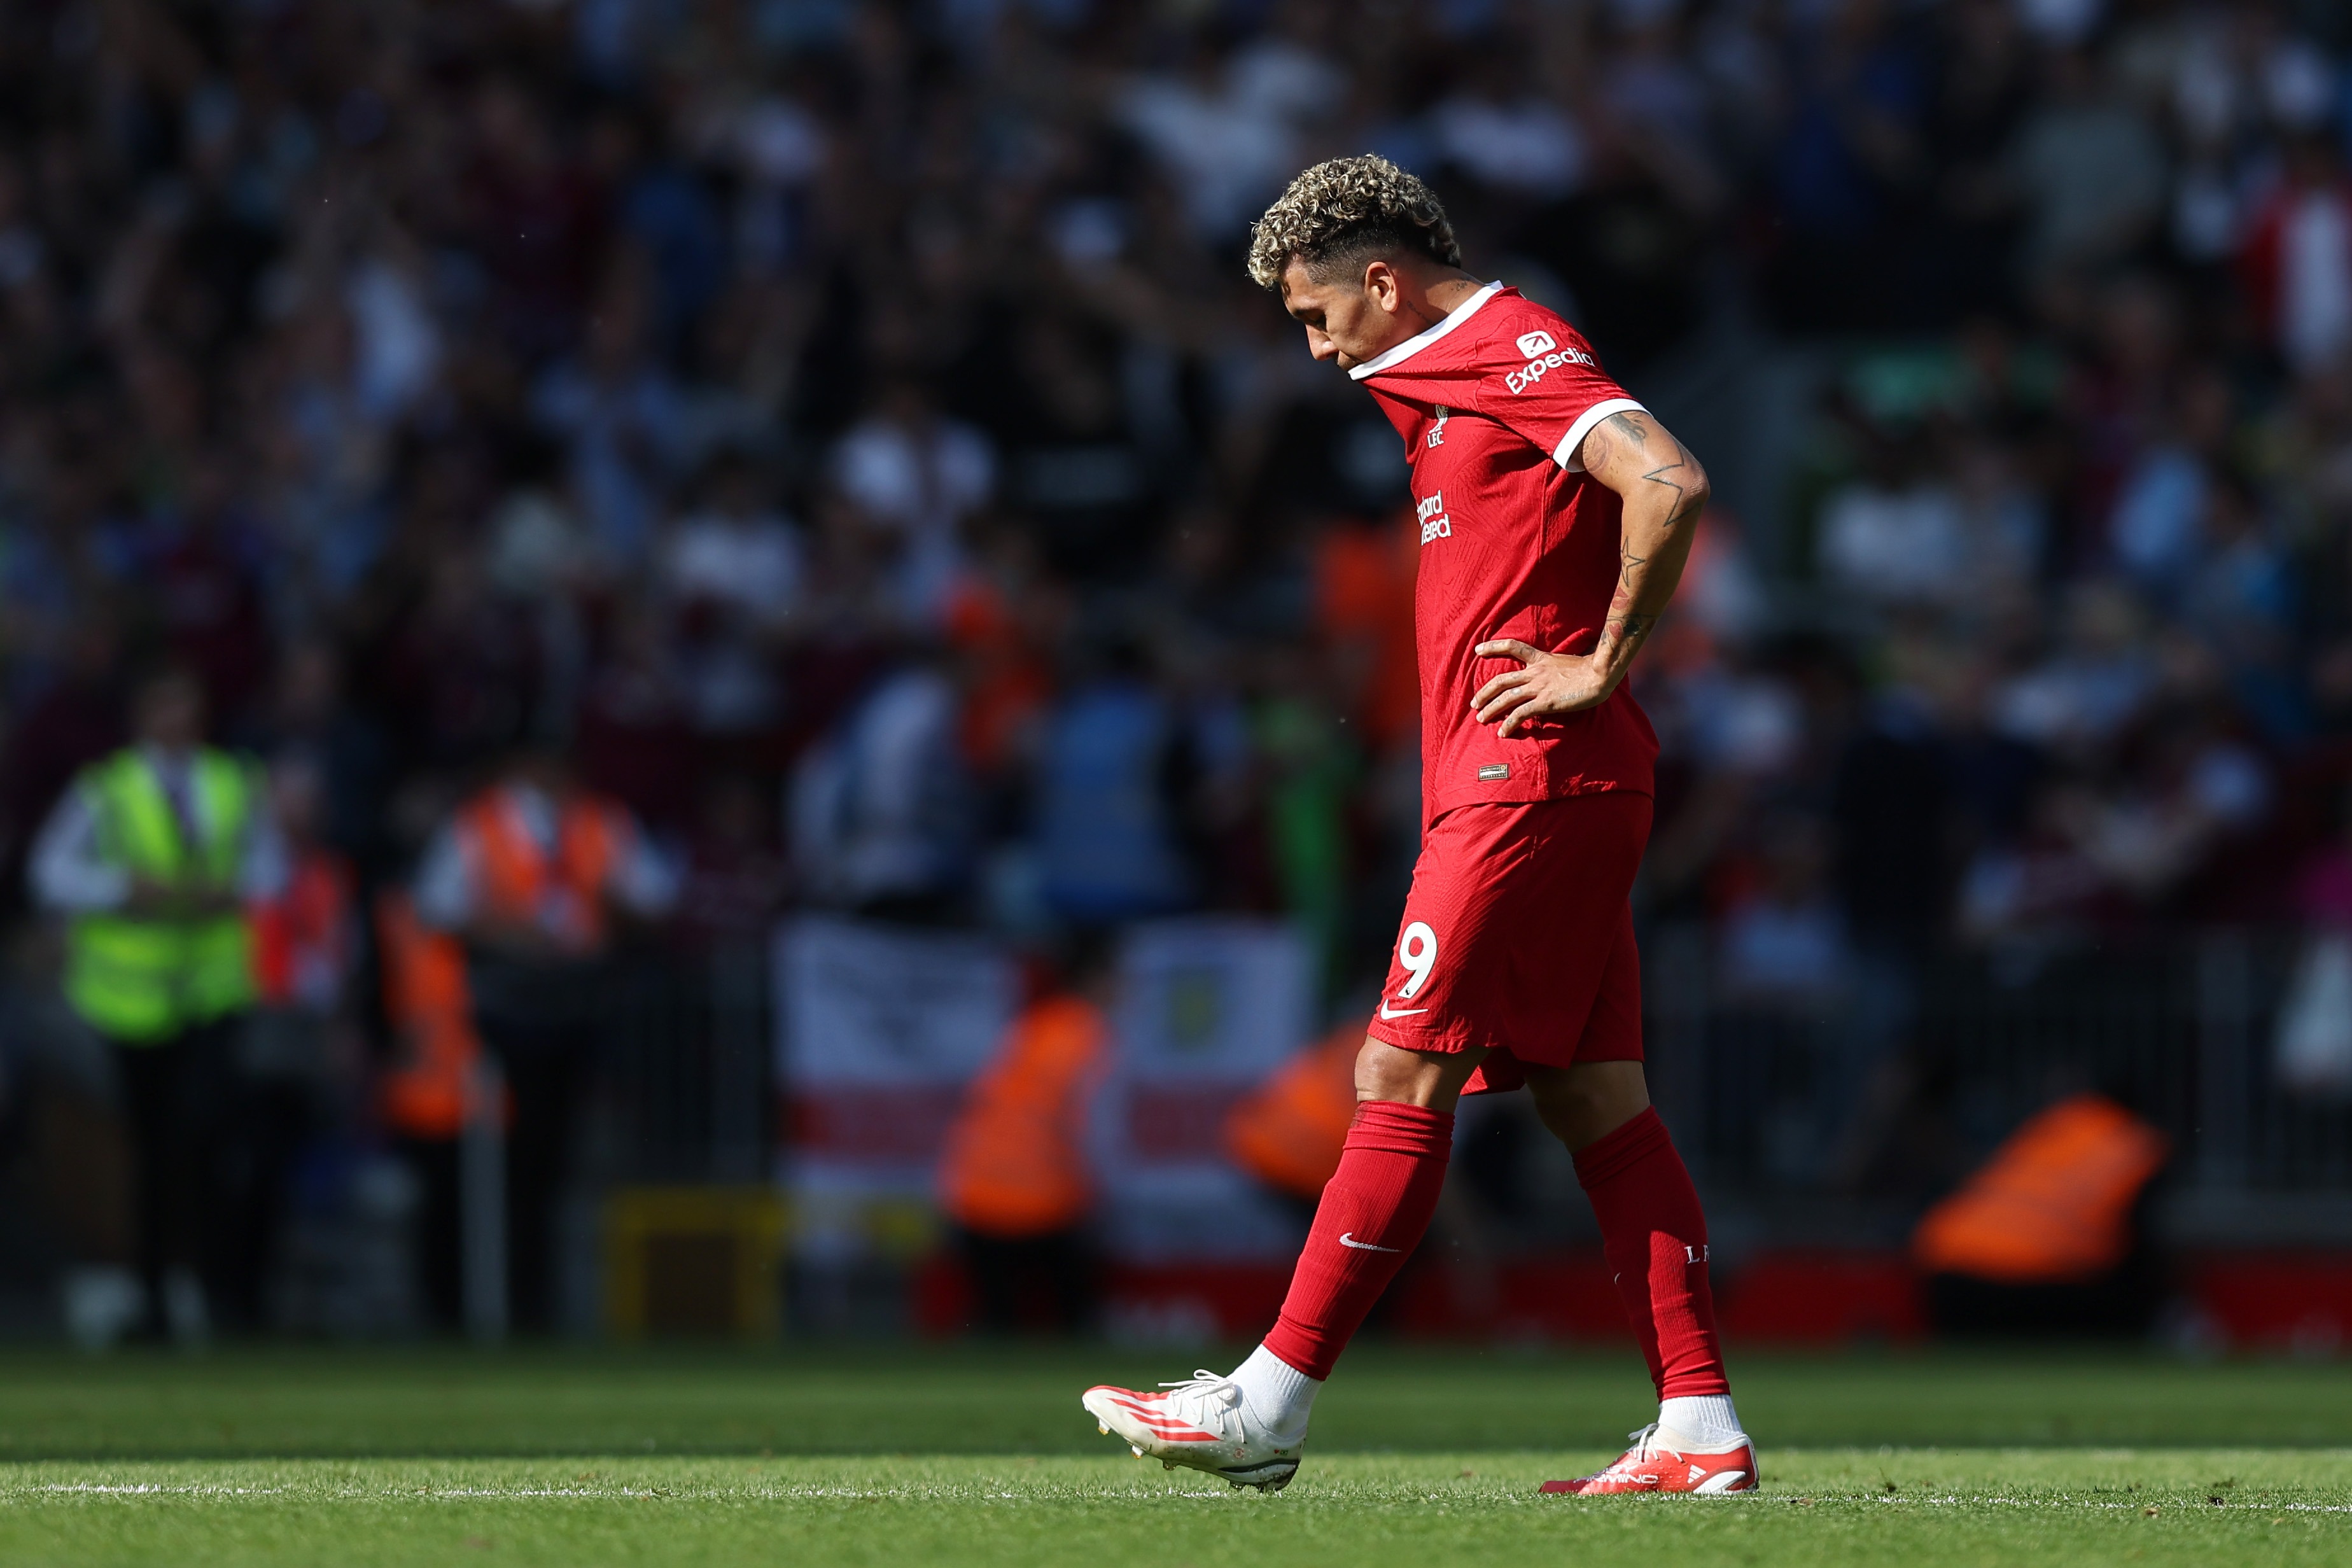 , Roberto Firmino in tears as he leaves Anfield pitch for final time after snatching last-gasp equaliser vs Aston Villa